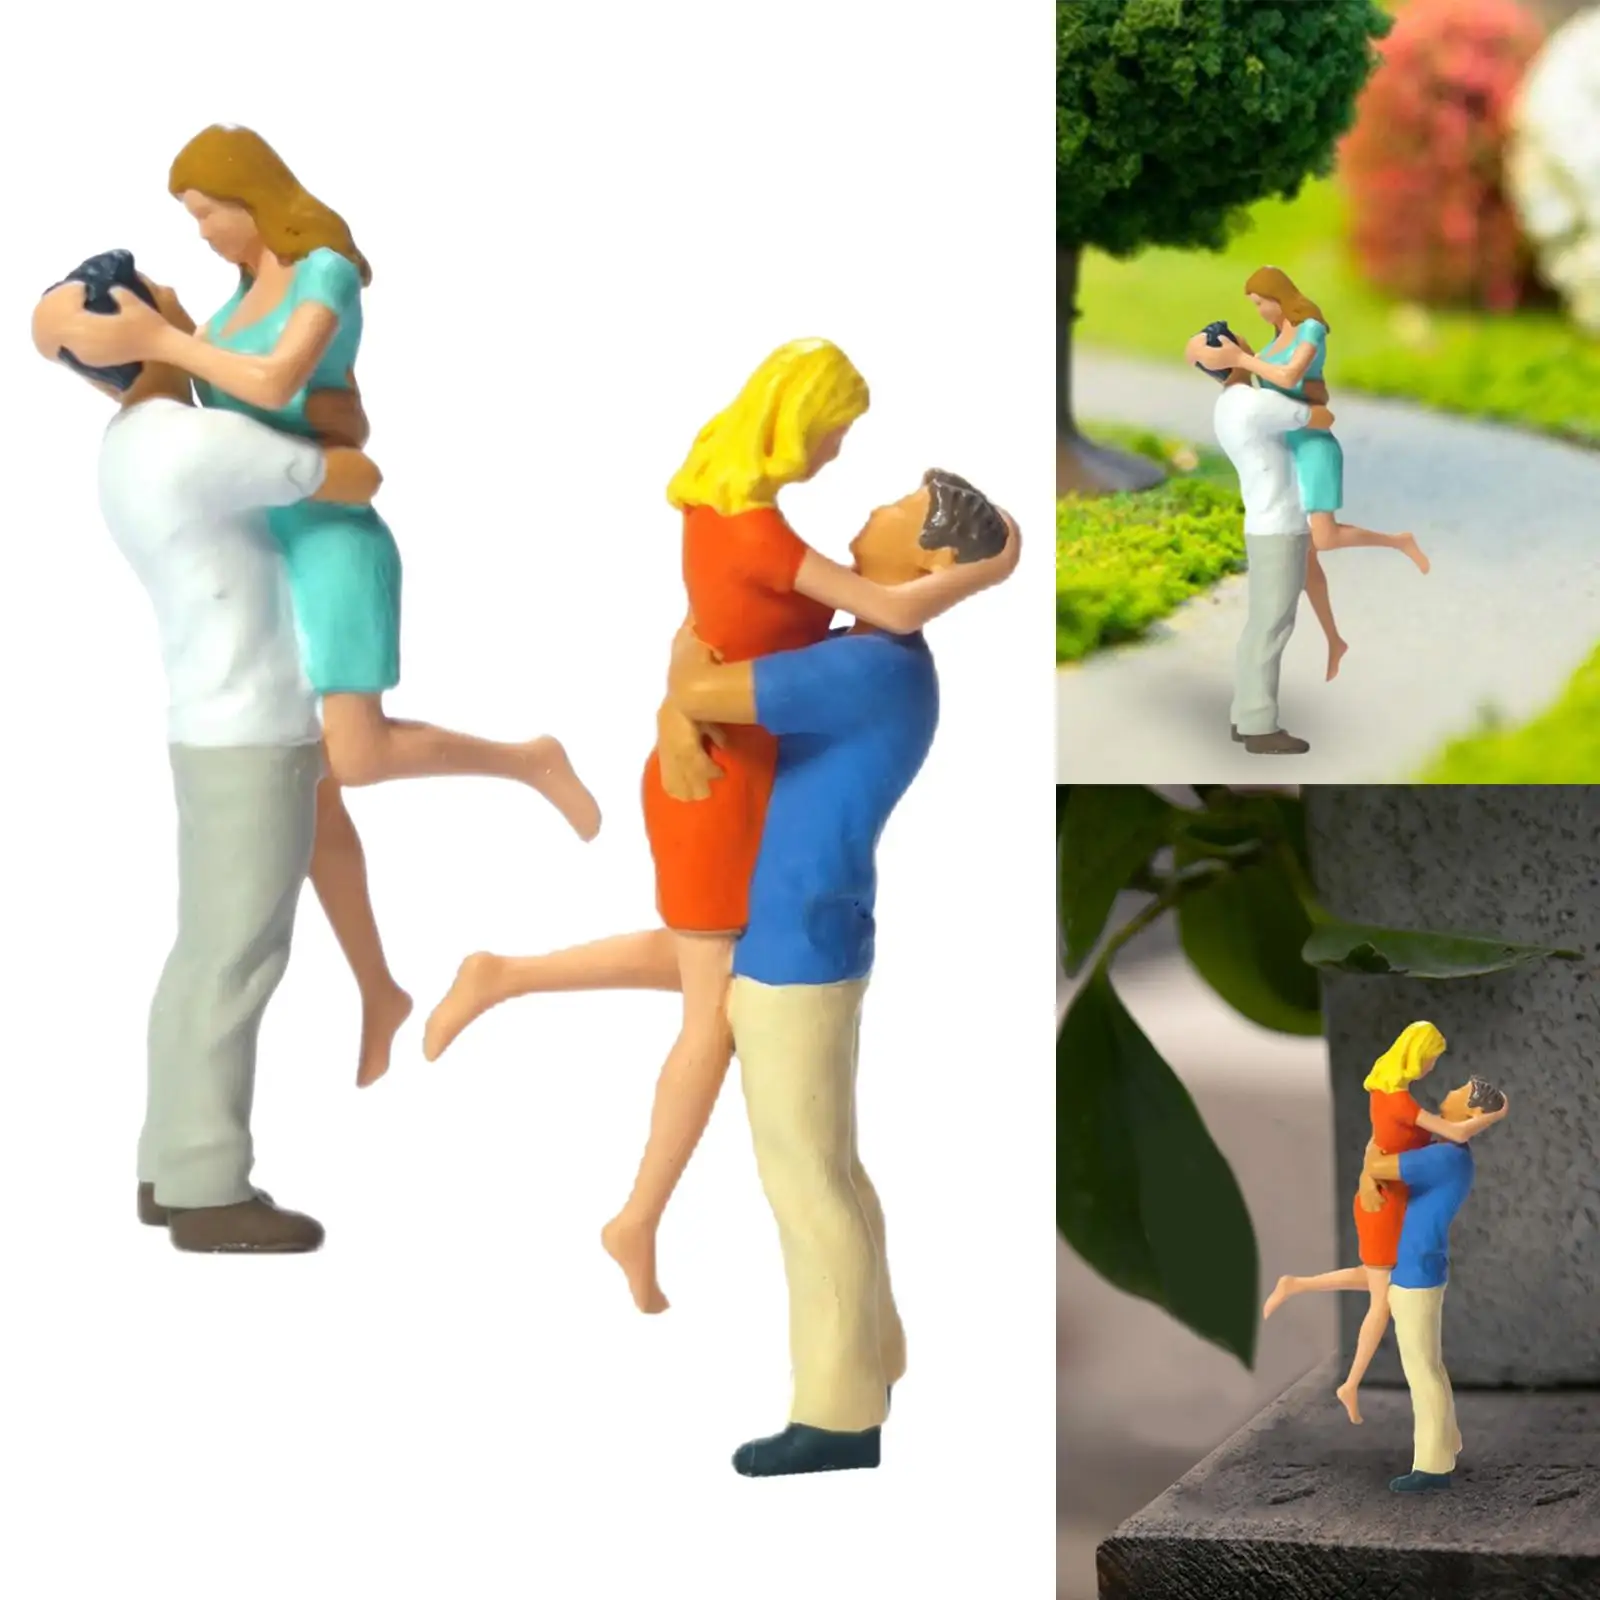 1/64 Men and Women Hugging Model Hand Painted Sand Table Ornament for Miniature Scene Diorama Photography Props Dollhouse Layout